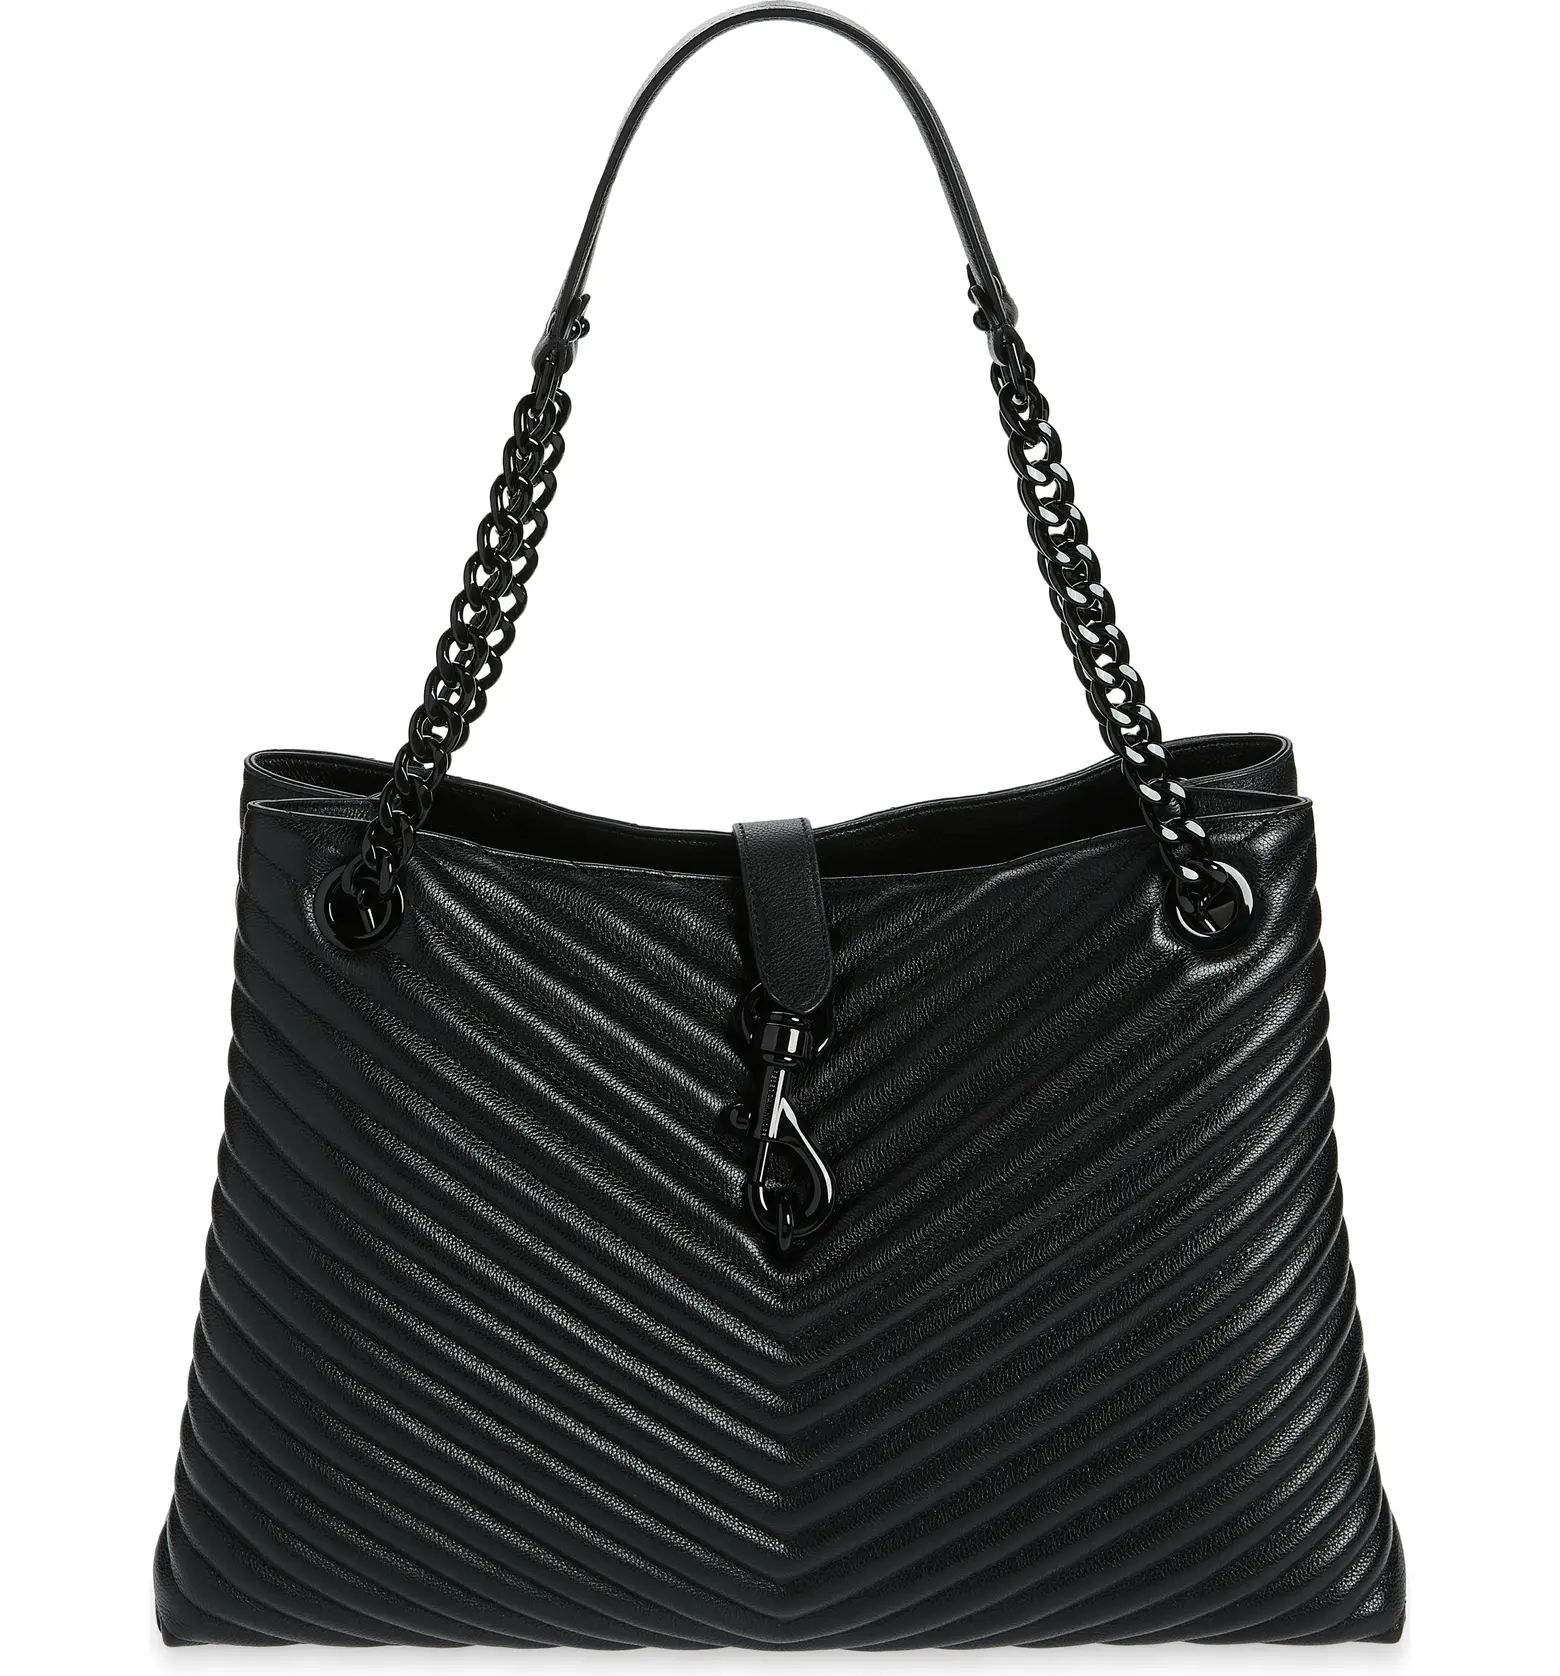 Edie Chevron Quilted ToteREBECCA MINKOFF | Nordstrom